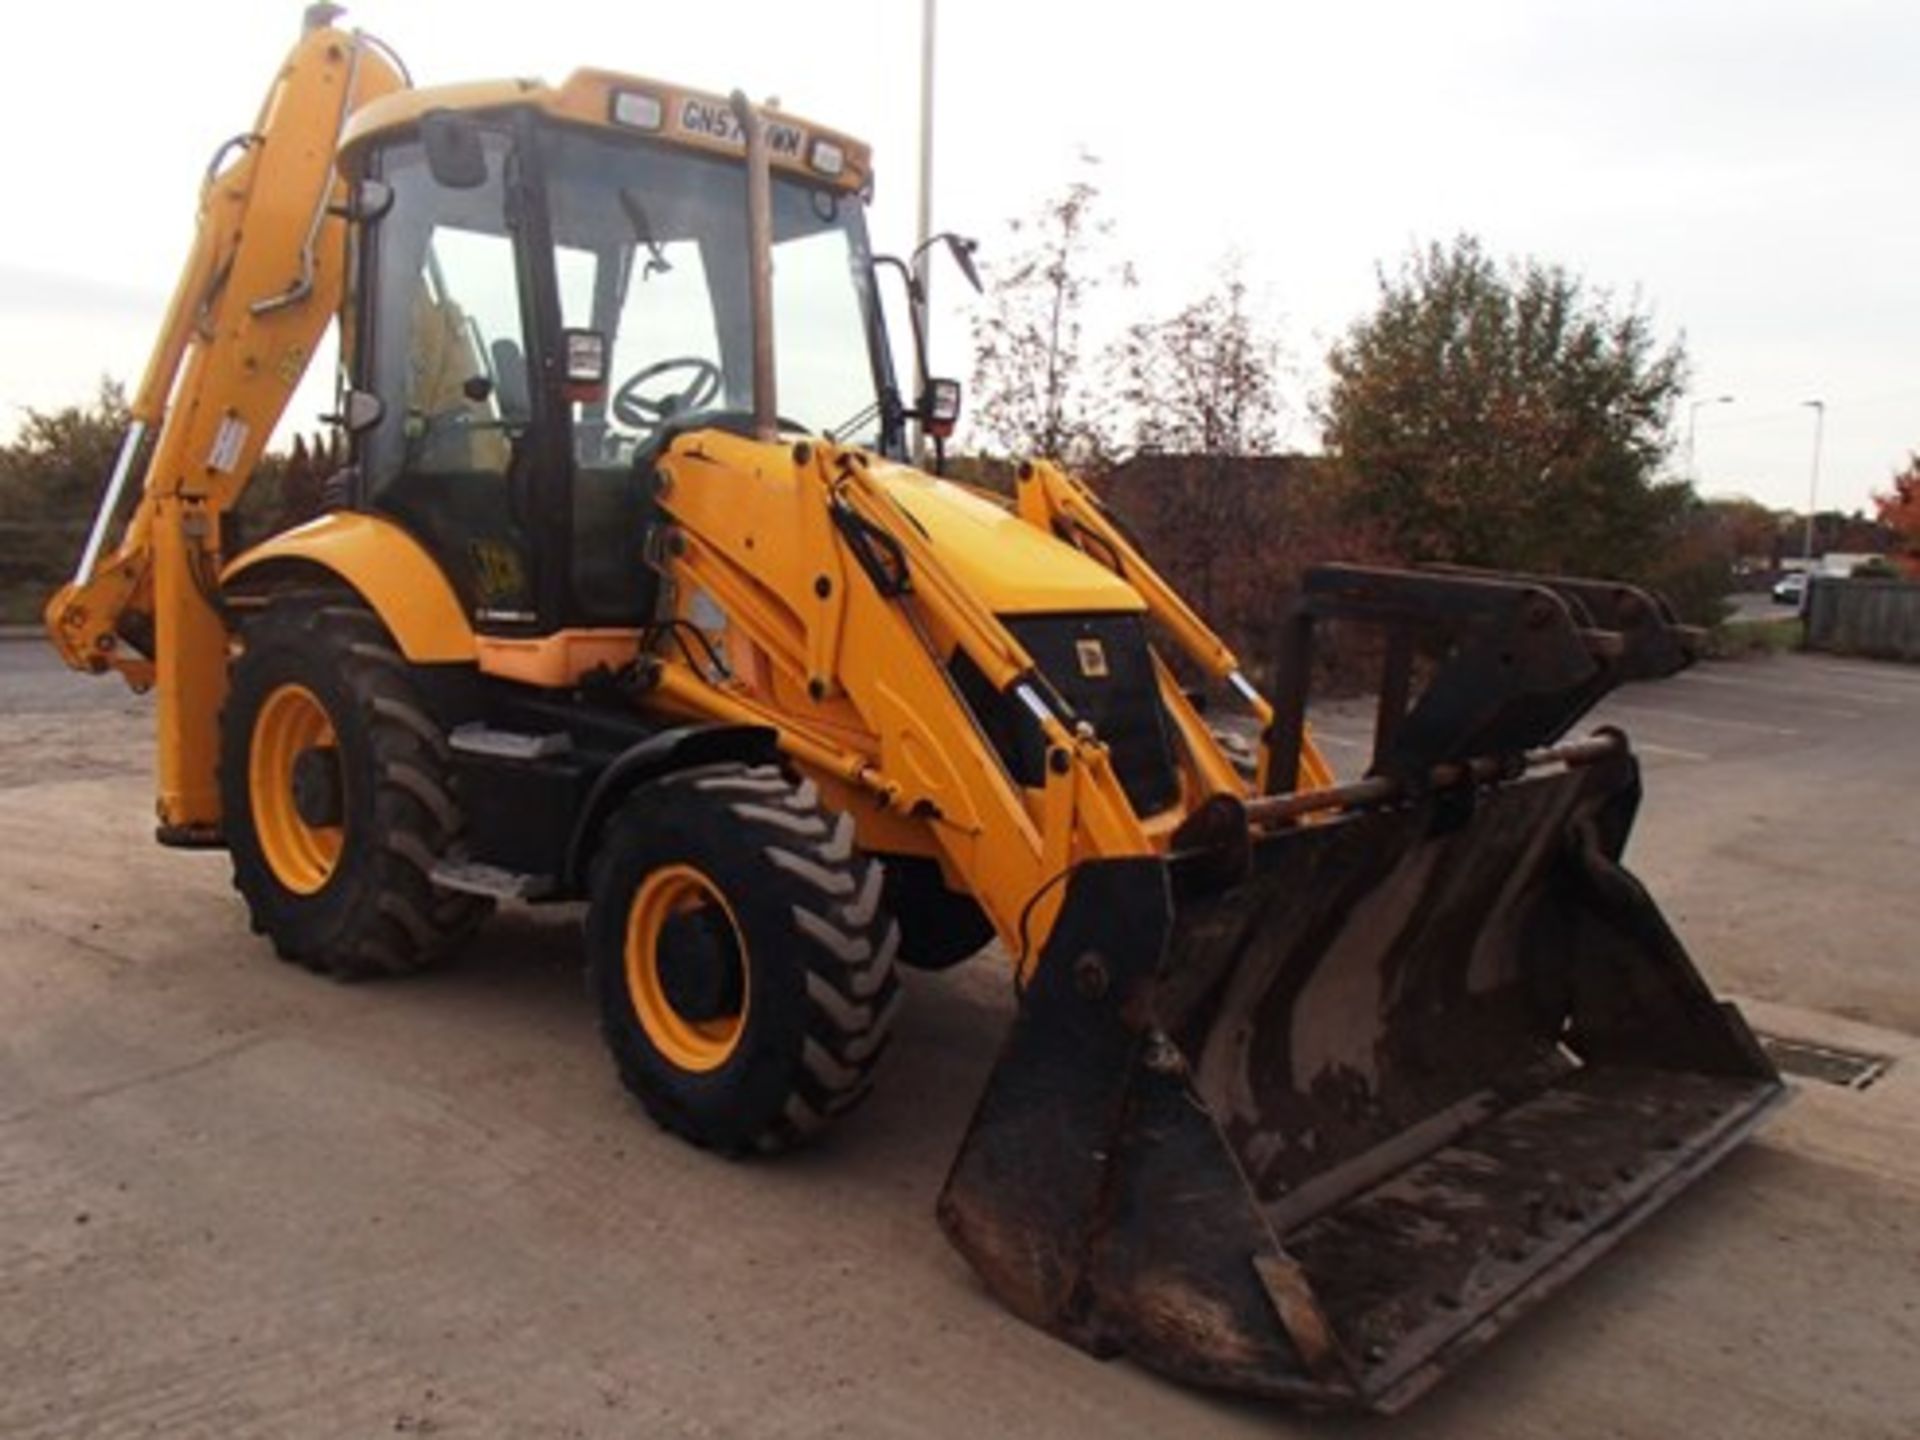 2008 JCB 3CX Digger Loader. Turbo Engine, Piped, Quick Hitch, 4in1 Bucket, Extending Dipper Arm, - Image 2 of 2